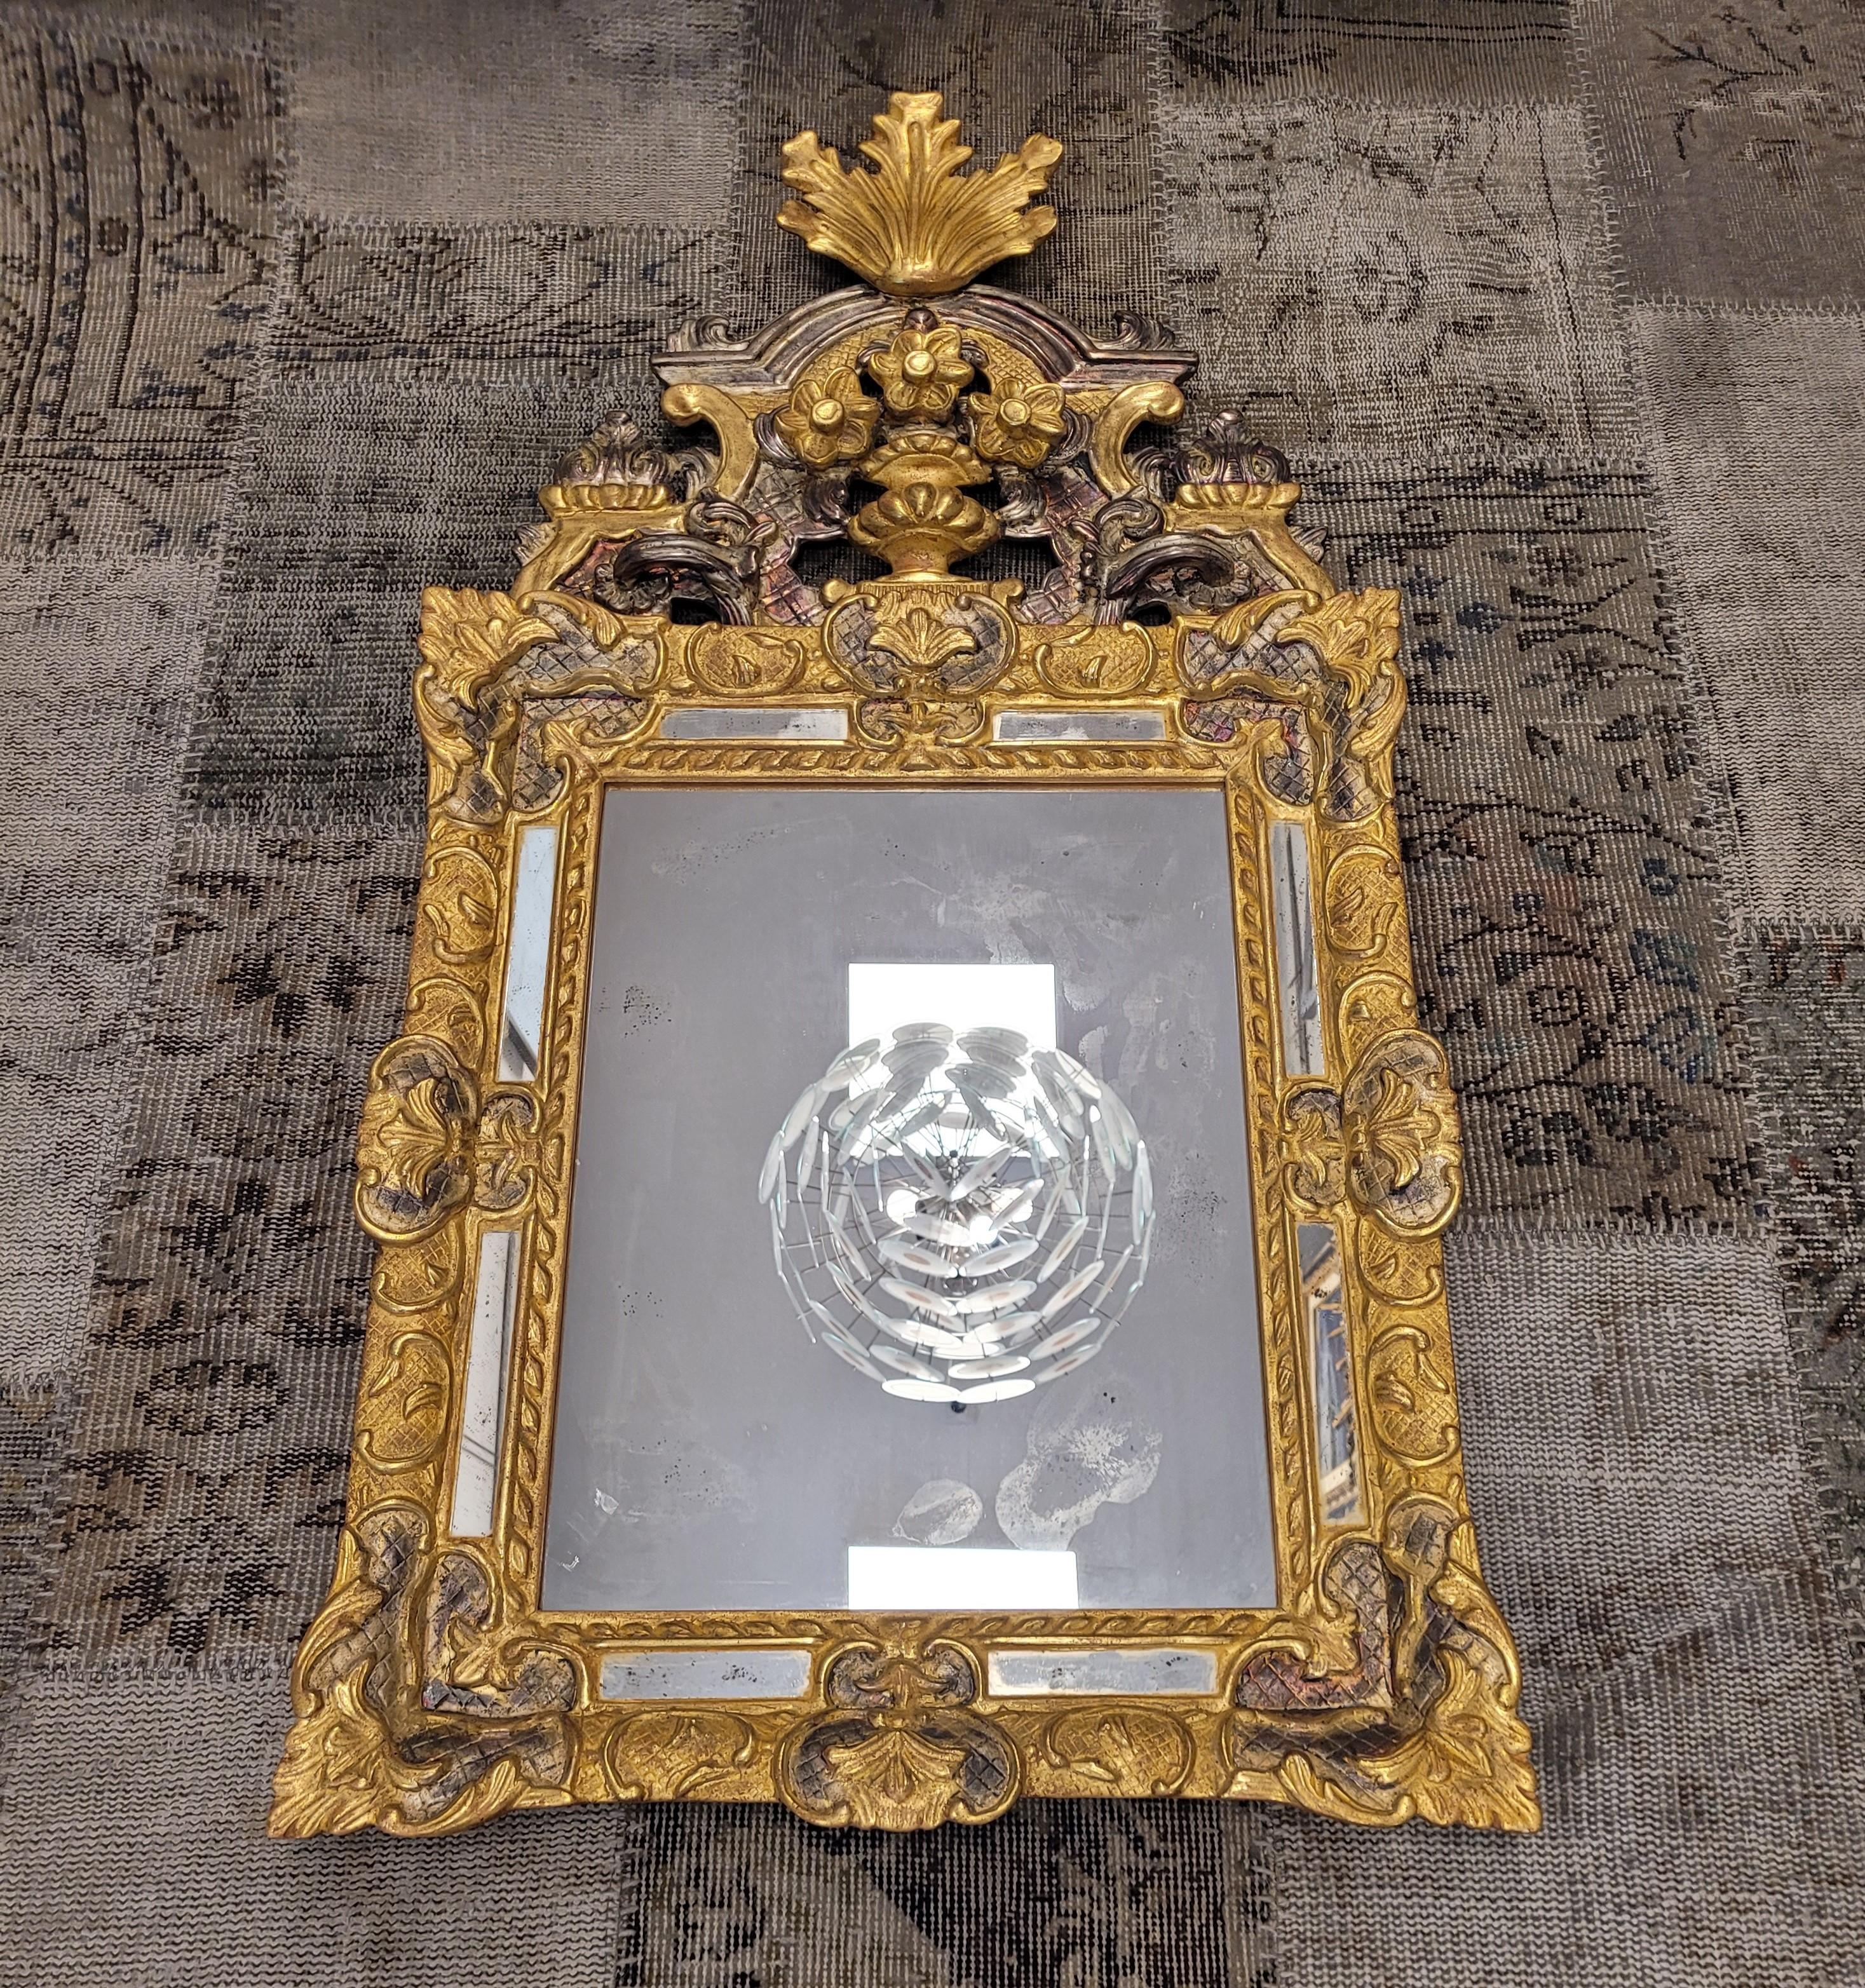 Outstanding and really gorgous mirror made by a  French master craftsman, following the extraordinary mirrors Louis XIV (1643 – 1715). Made of finely carved , gilded and silver  wood with an aged effect. Body with a quadrangular profile and an